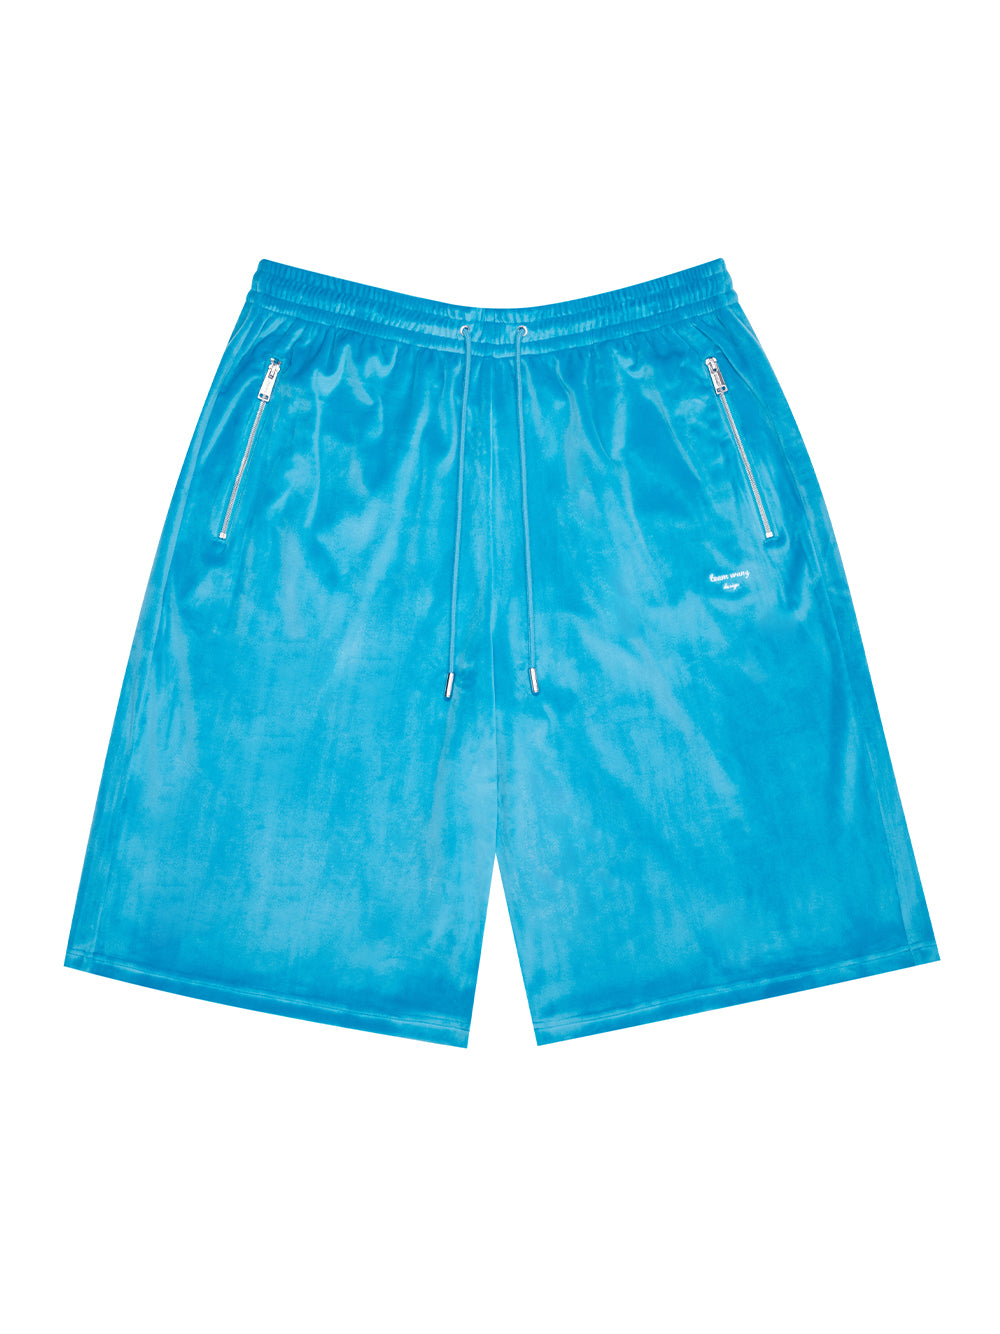 STAY FOR THE NIGHT CASUAL SHORTS (BLUE)